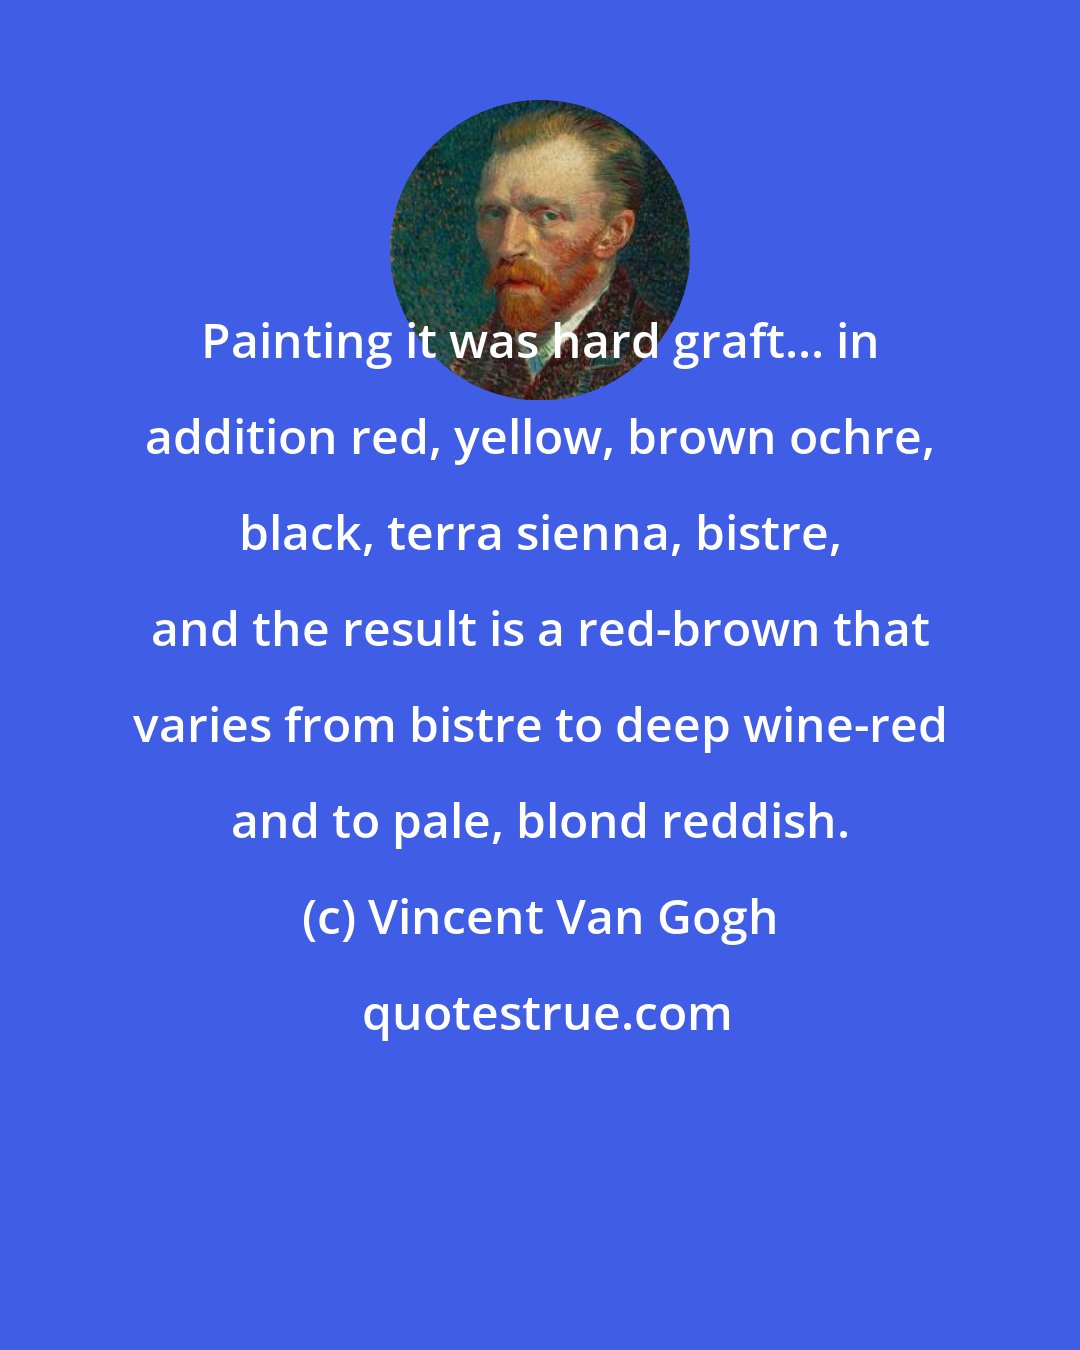 Vincent Van Gogh: Painting it was hard graft... in addition red, yellow, brown ochre, black, terra sienna, bistre, and the result is a red-brown that varies from bistre to deep wine-red and to pale, blond reddish.